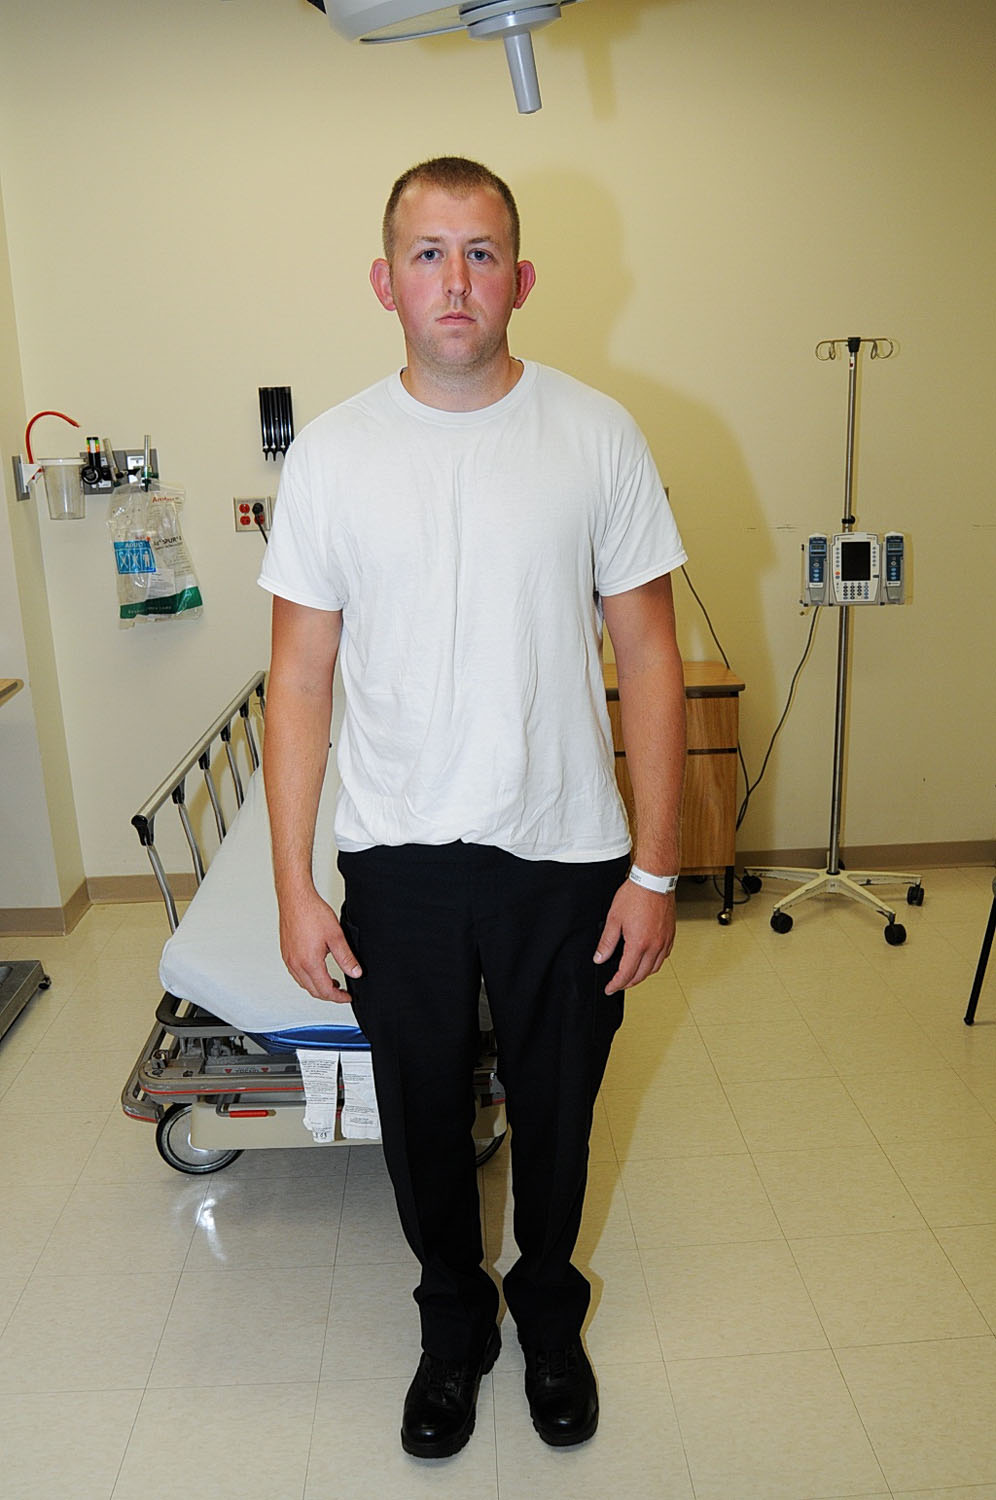 An undated evidence photograph made available by the St. Louis County prosecutors office on Nov. 25, 2014 shows Ferguson police officer Darren Wilson during his medical examination after the shooting of Michael Brown.